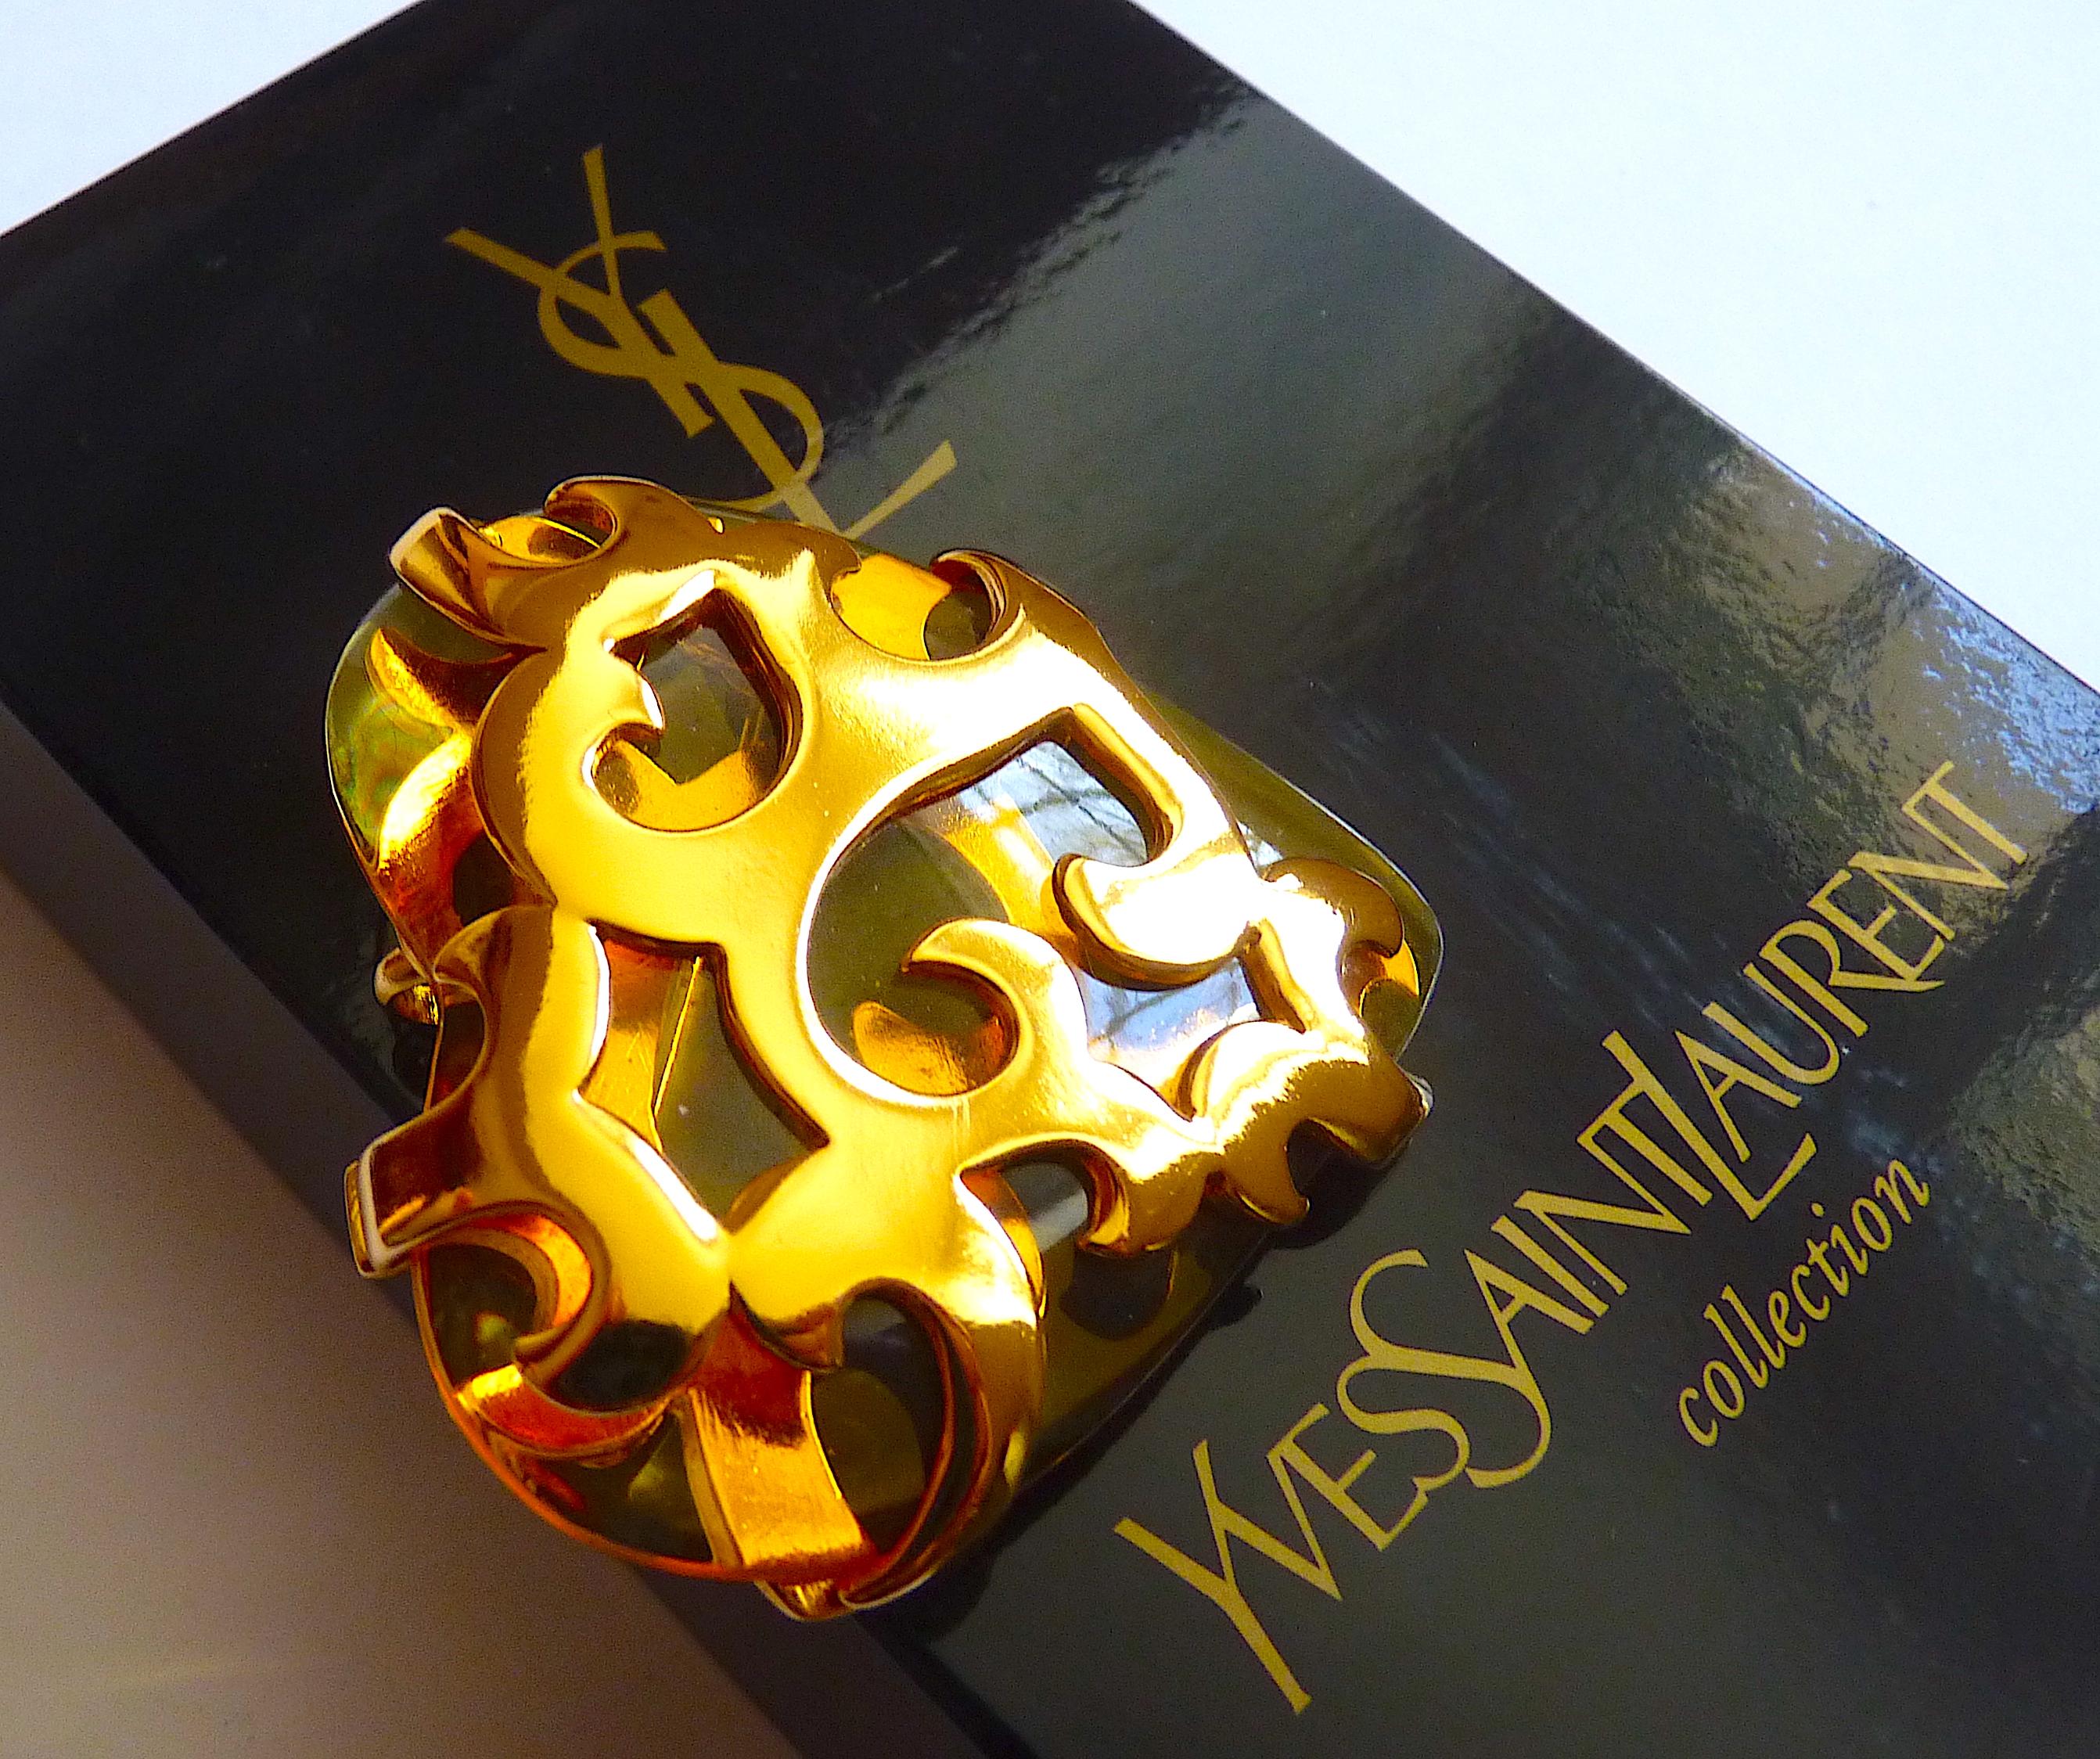 Iconic YSL Brooch Designed By Robert Goossens, Clear Lucite Heart and Gold Plated Metal Arabesques. Vintage from the 80s, can be worn as a Pendant. 
Will come with its complete packaging : black velvet YSL Pouch and Original YSL Box, ready to gift